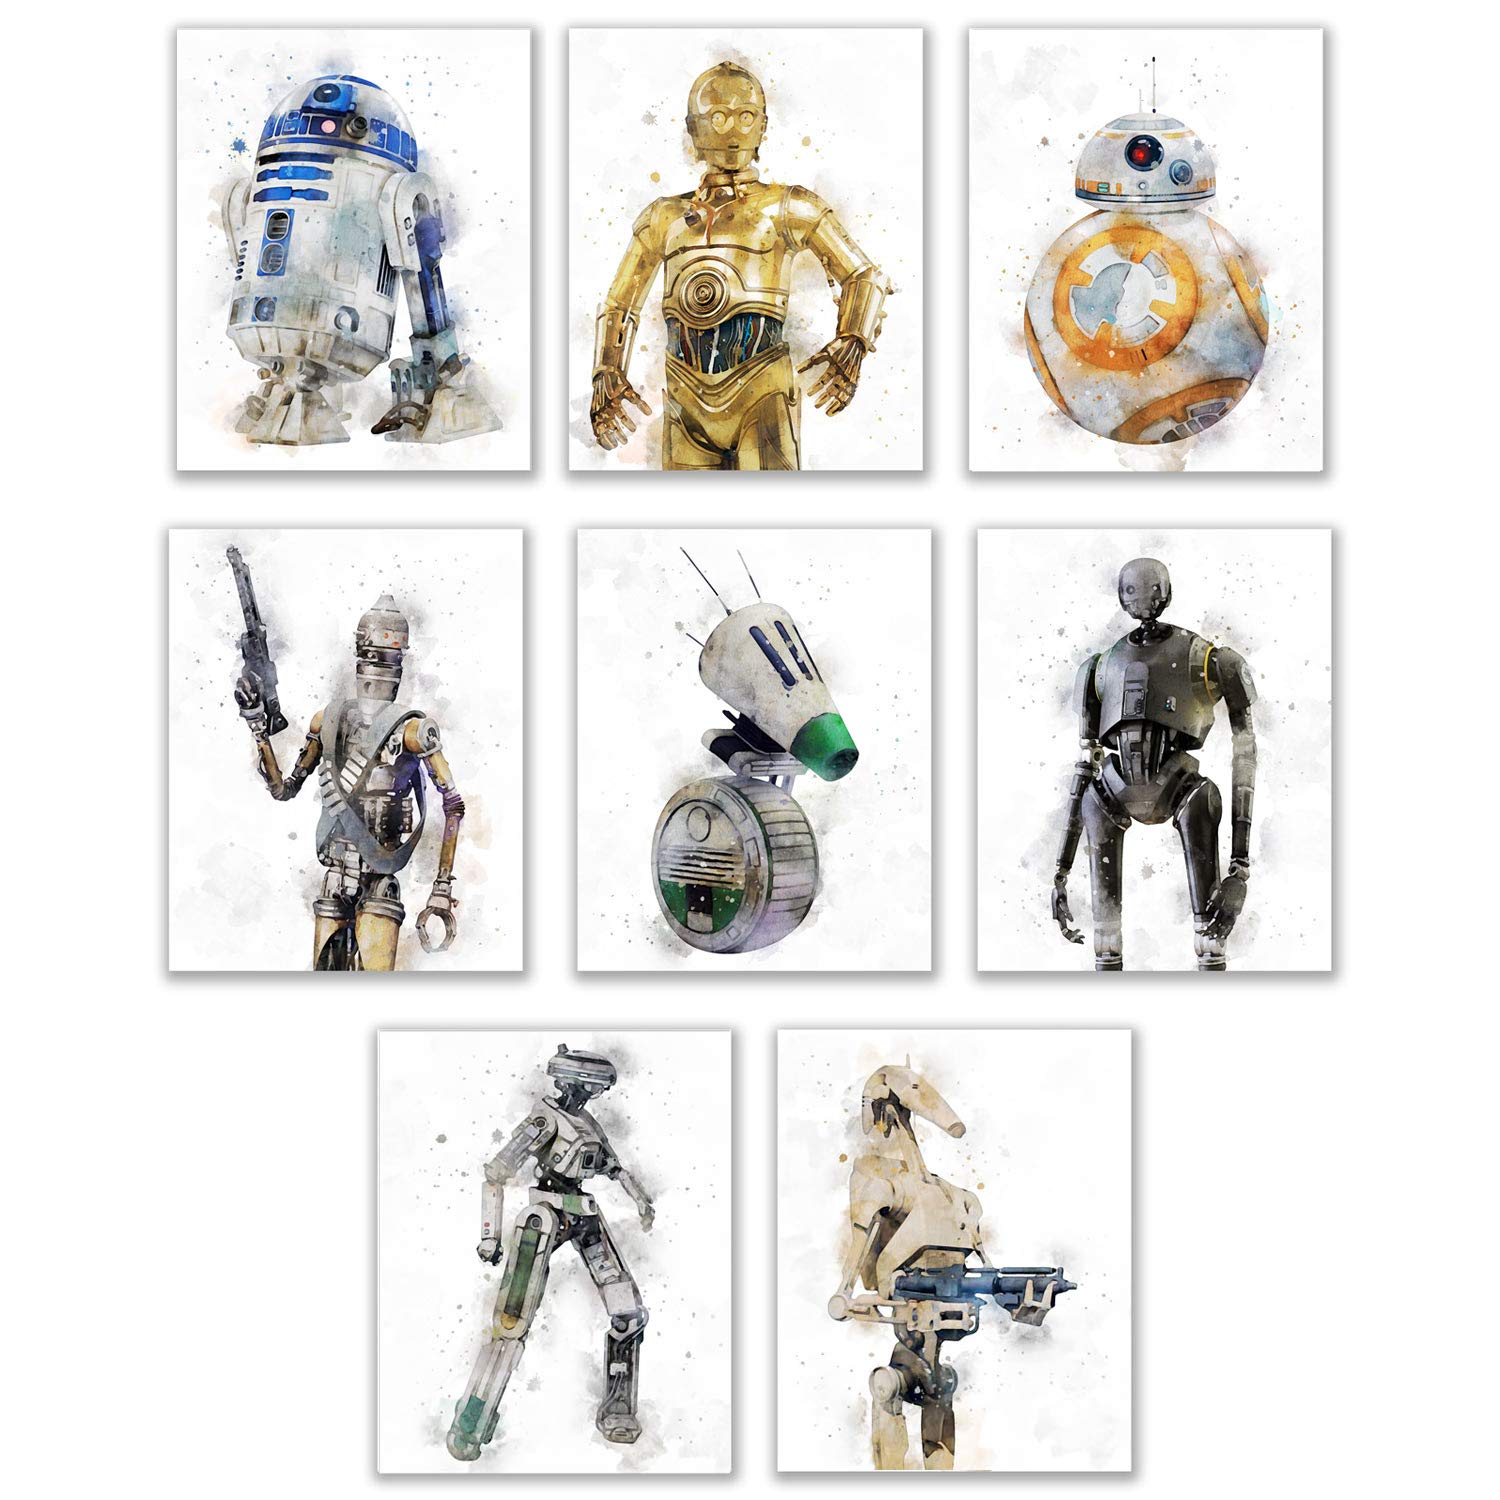 Book Cover Star Wars Droids Prints - Set of 8 (8 inches x 10 inches) Watercolor Wall Decor Photos - R2D2 C3PO BB8 K-2SO IG-88 D-O L3-37 Battle Droids